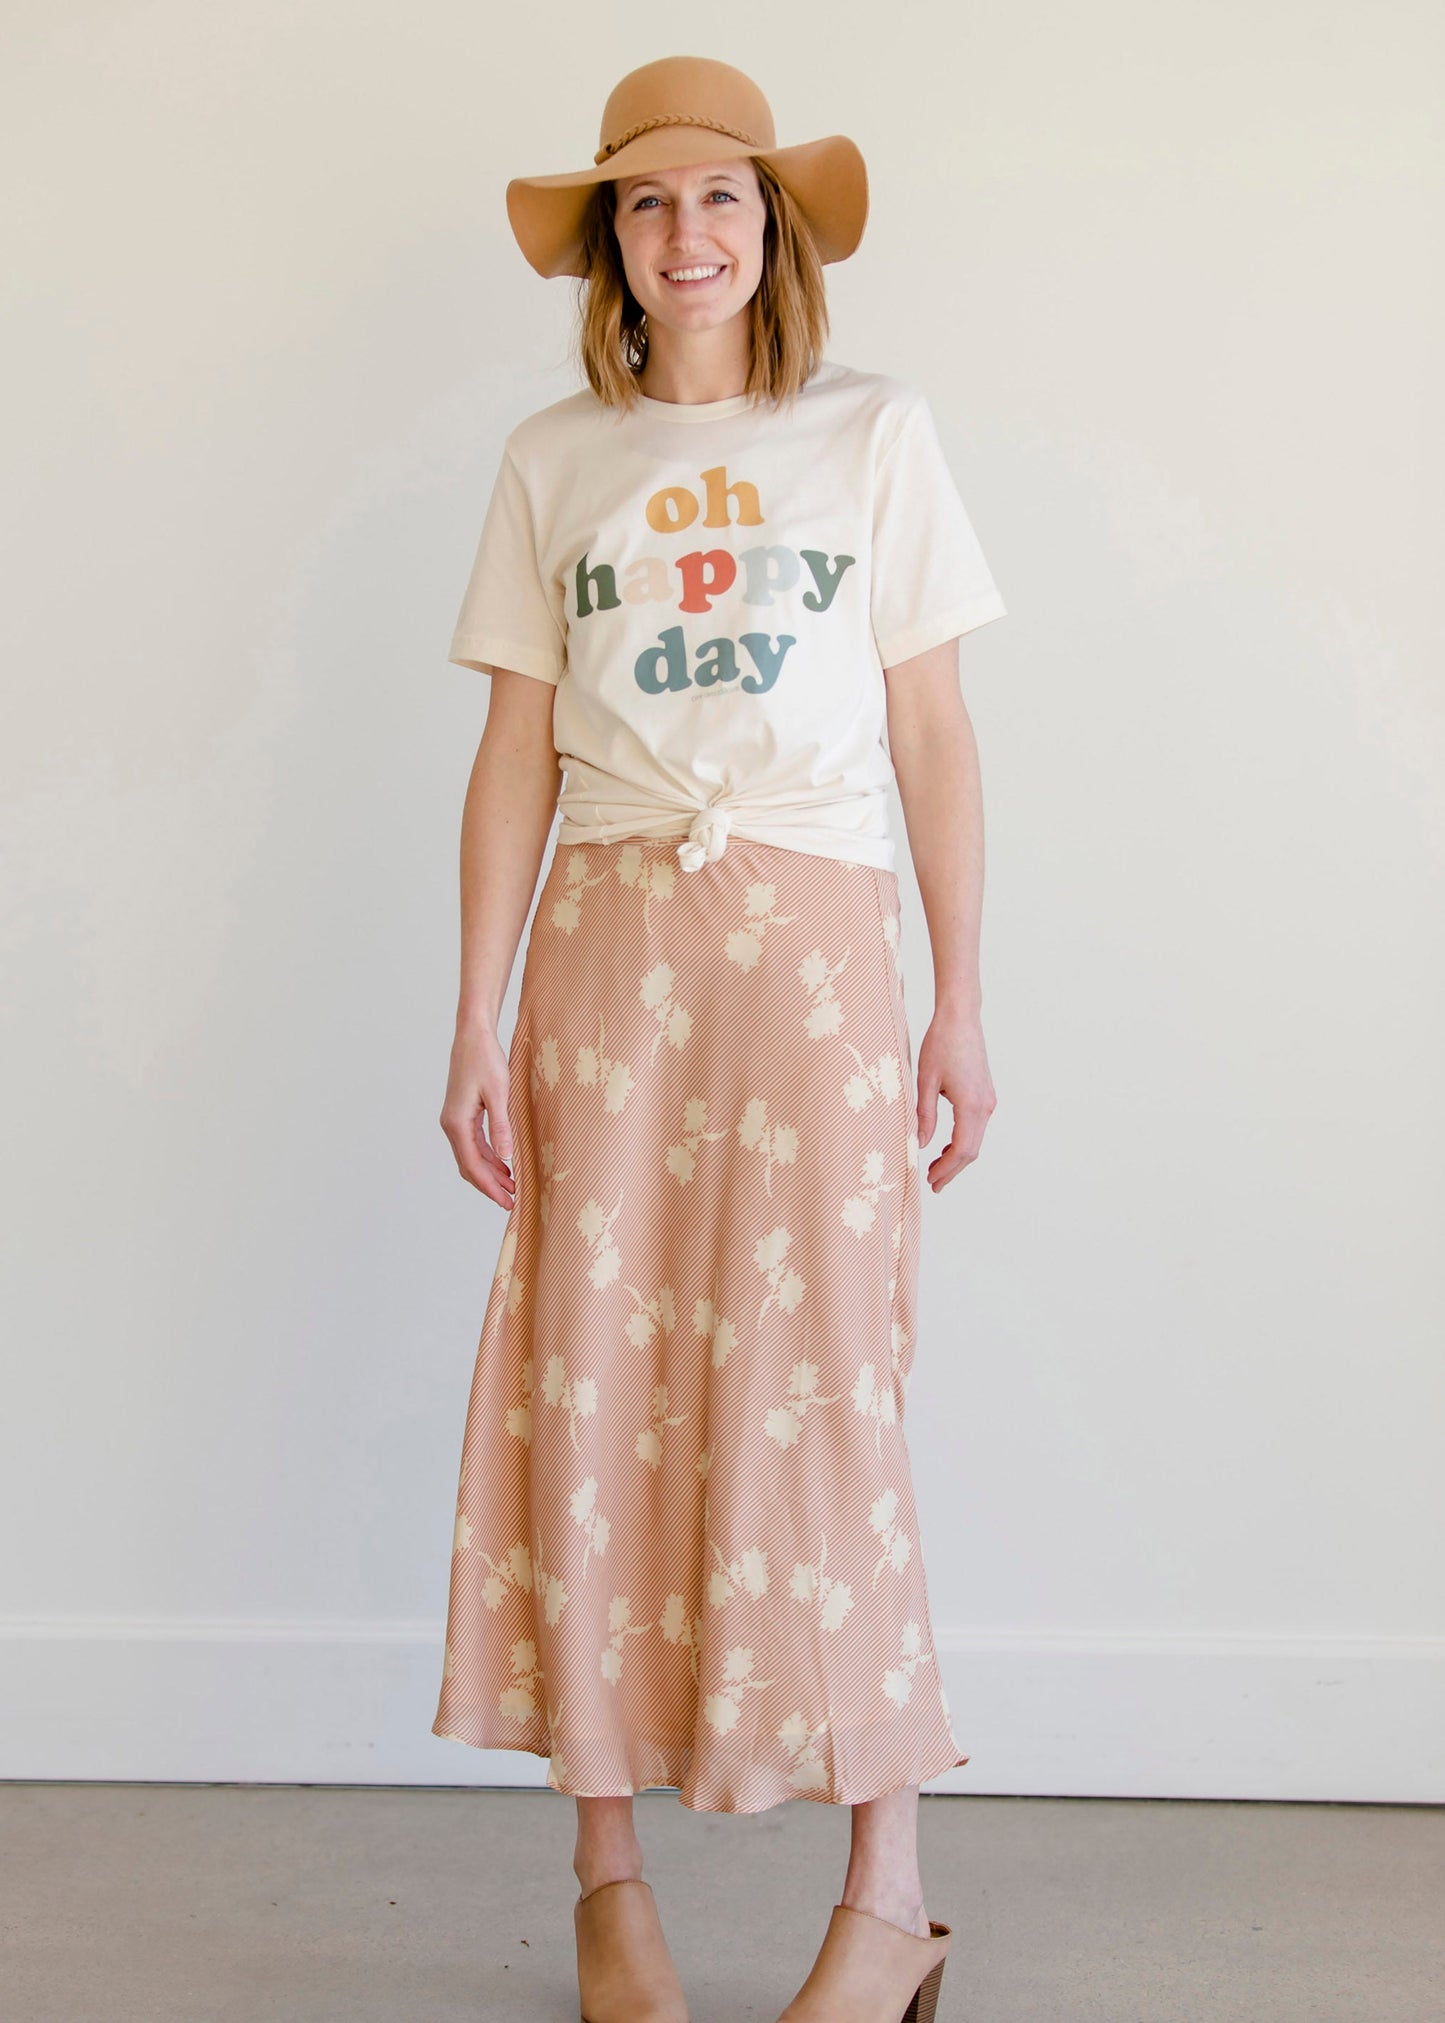 Oh Happy Day Vintage Tee - FINAL SALE Tops